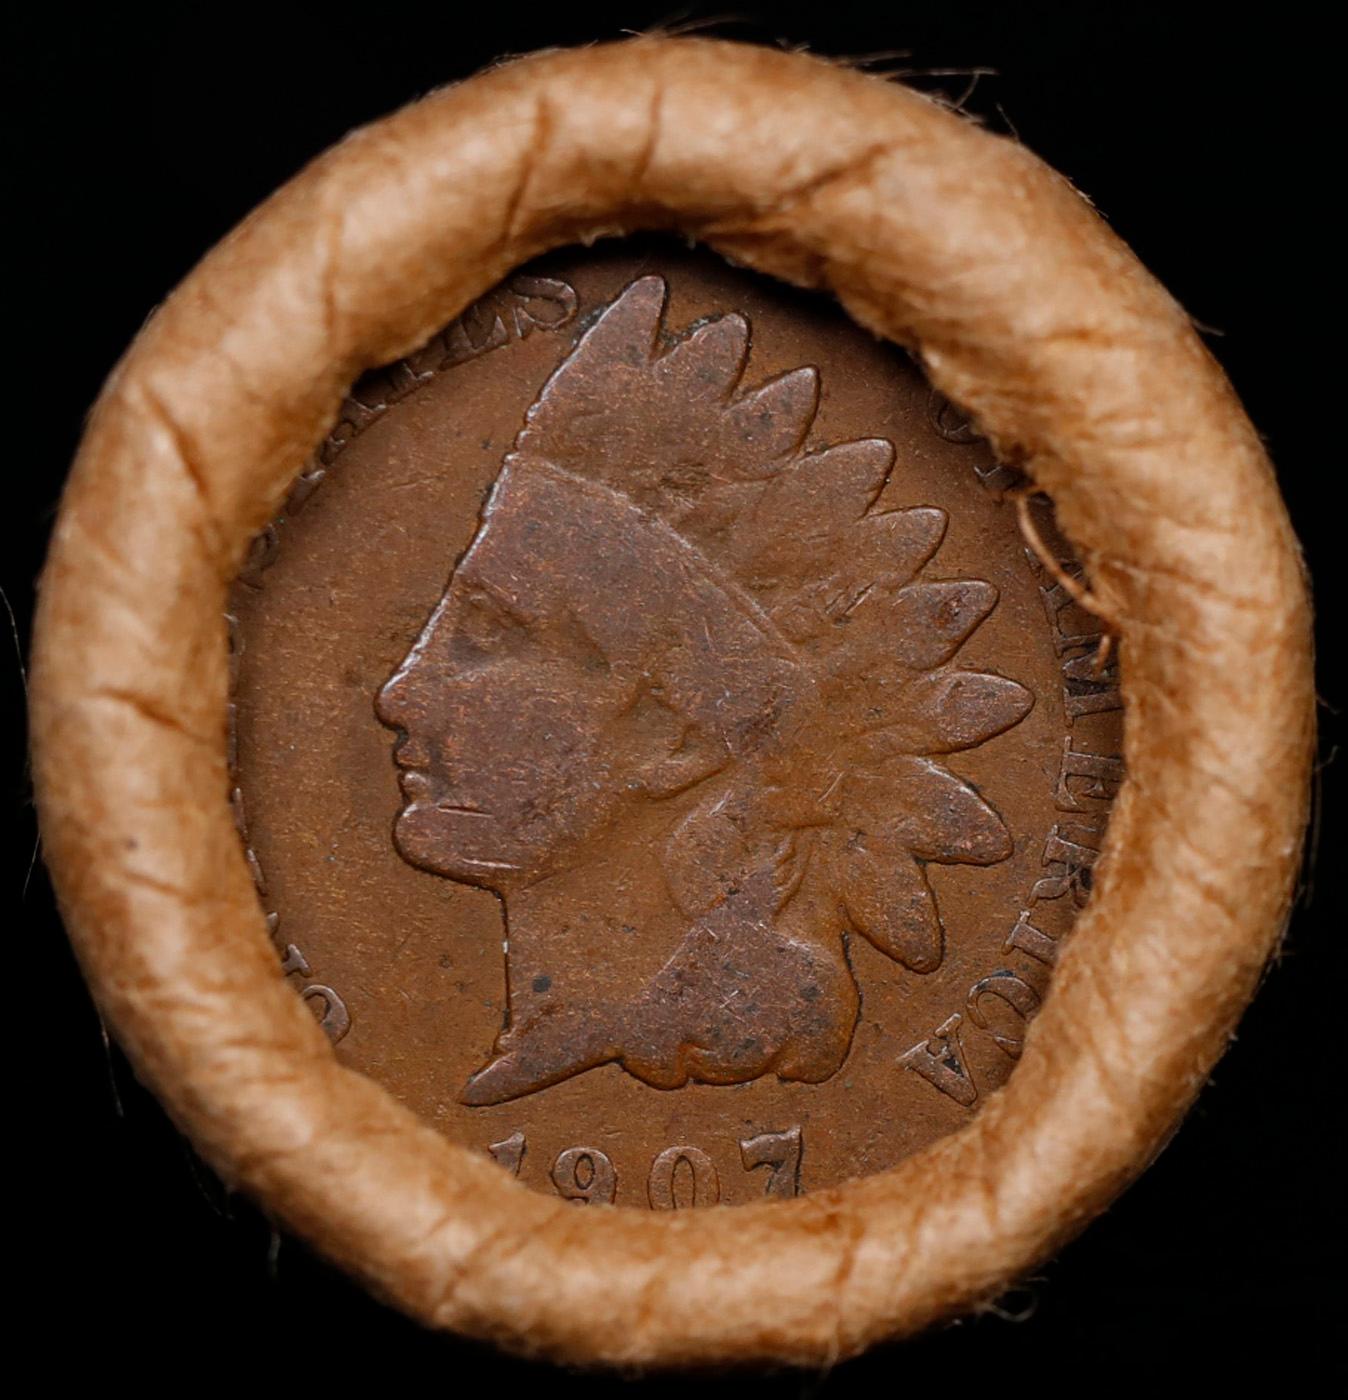 Lincoln Wheat Cent 1c Mixed Roll Orig Brandt McDonalds Wrapper, 1917-d end, 1907 Indian other end